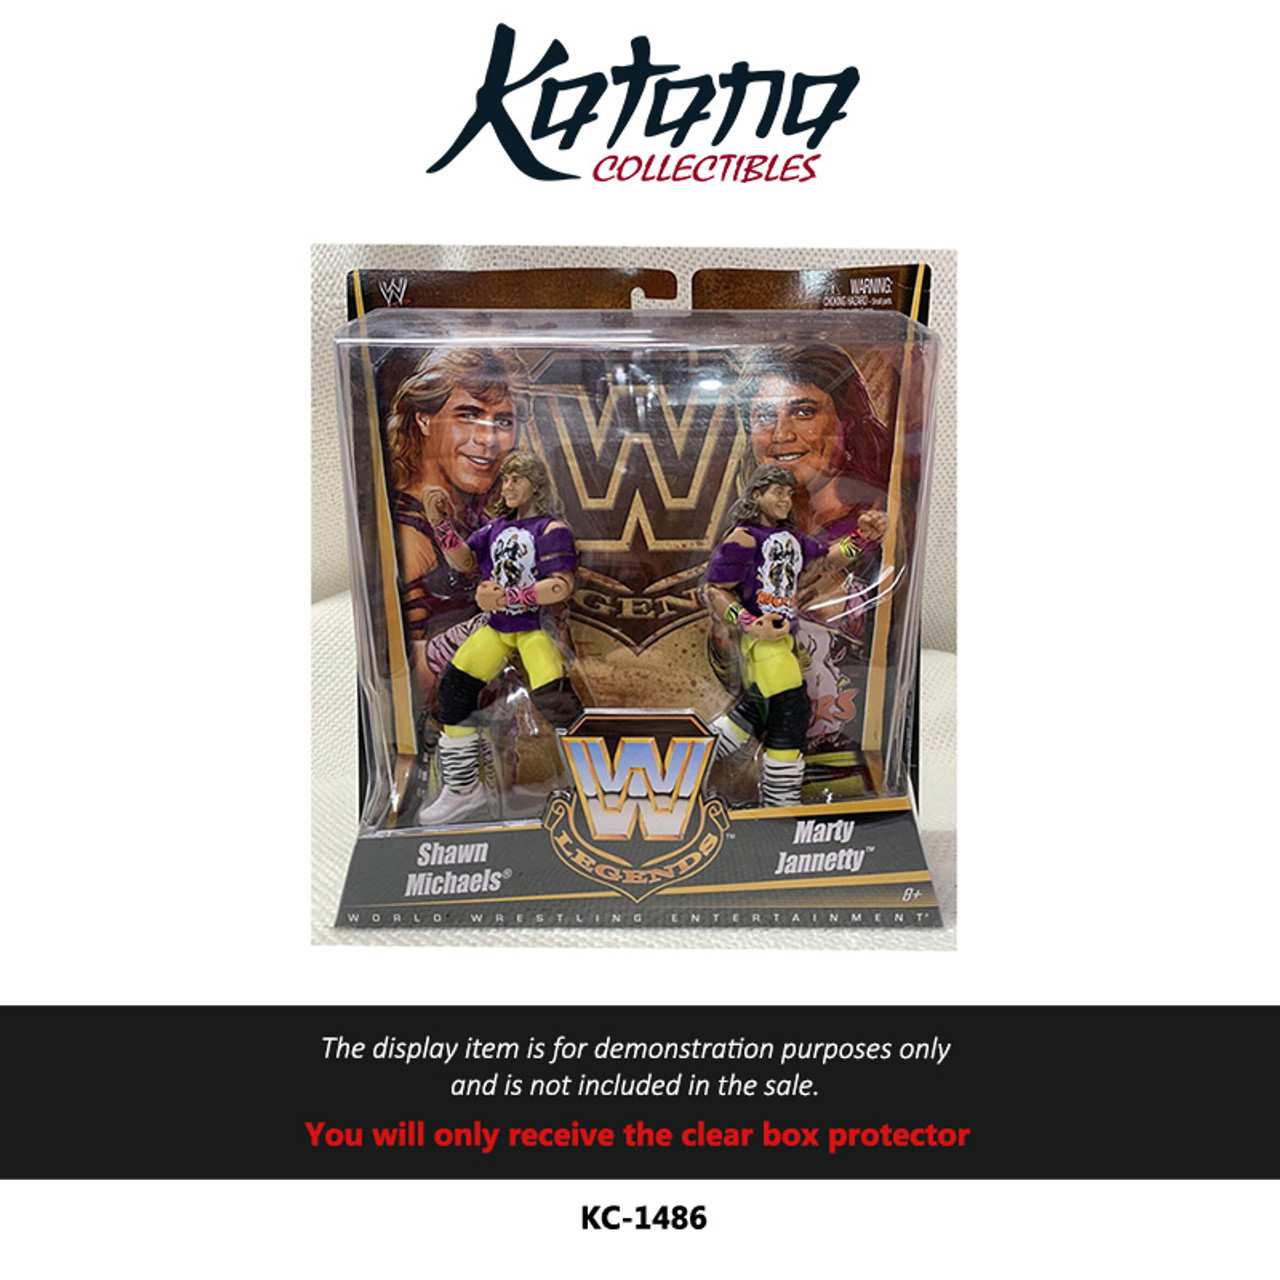 Katana Collectibles Protector For WWE Legends The Rockers 2 packs